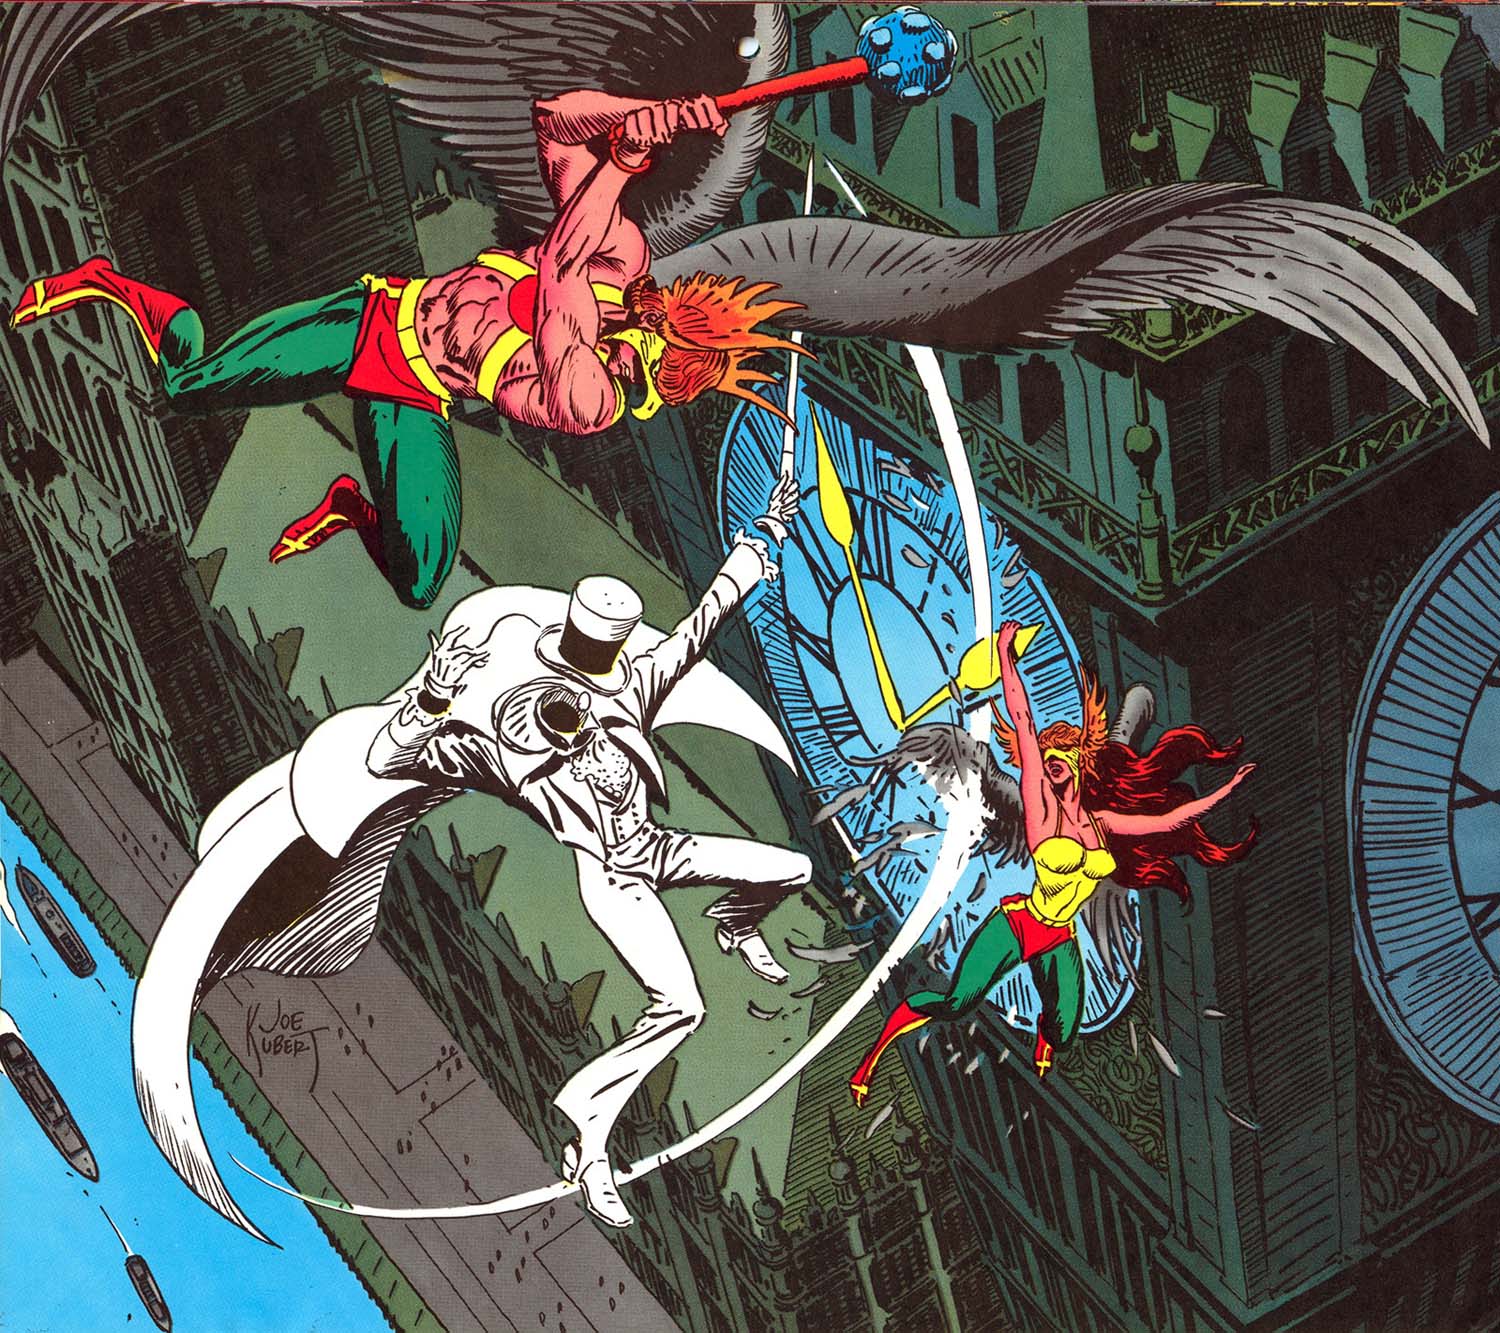 1977 Super DC Calendar for July: Hawkman and Hawkgirl vs The Gentleman Ghost